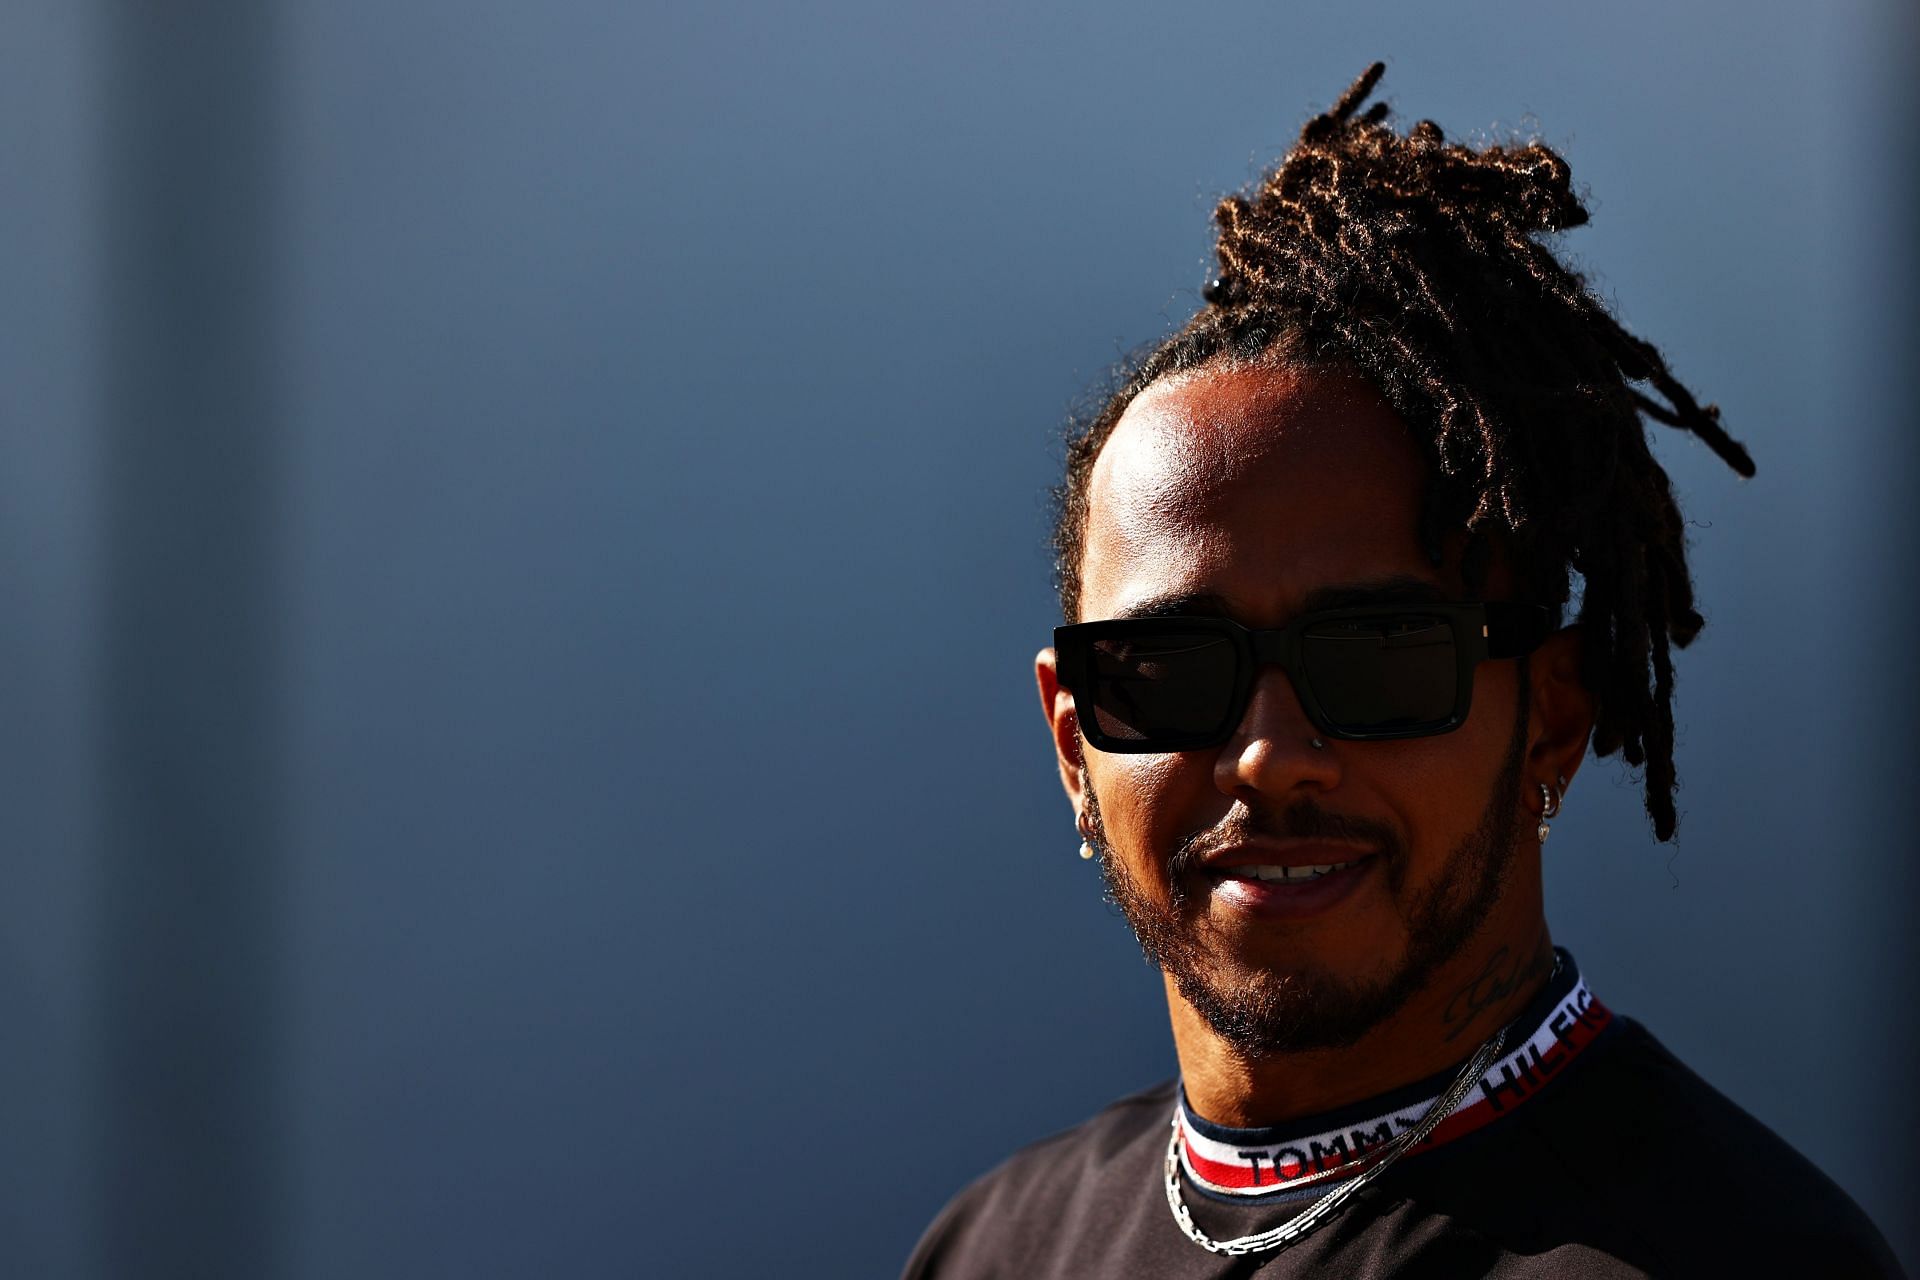 Lewis Hamilton in the F1 Paddock. (Photo by Mark Thompson/Getty Images)